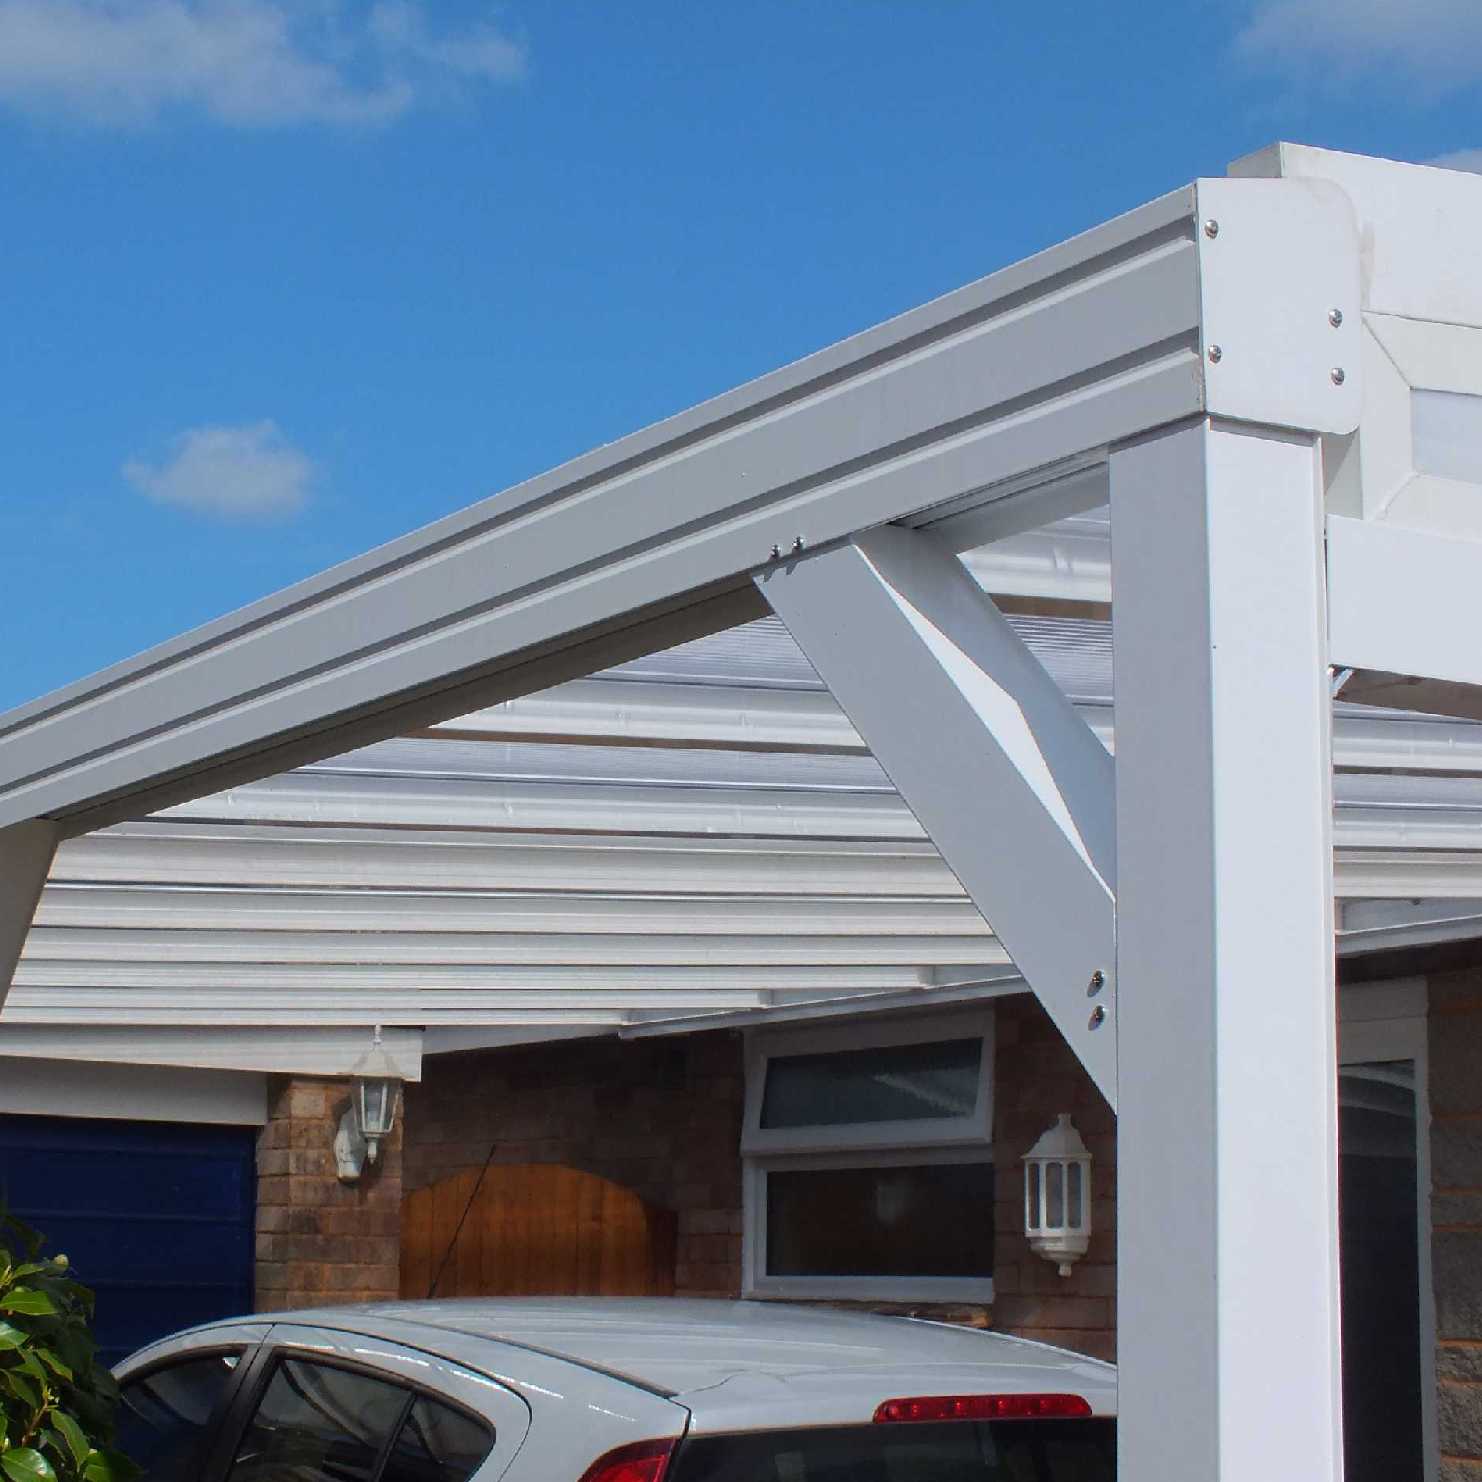 Great deals on Omega Smart Lean-To Canopy, White with 16mm Polycarbonate Glazing - 7.4m (W) x 4.5m (P), (4) Supporting Posts